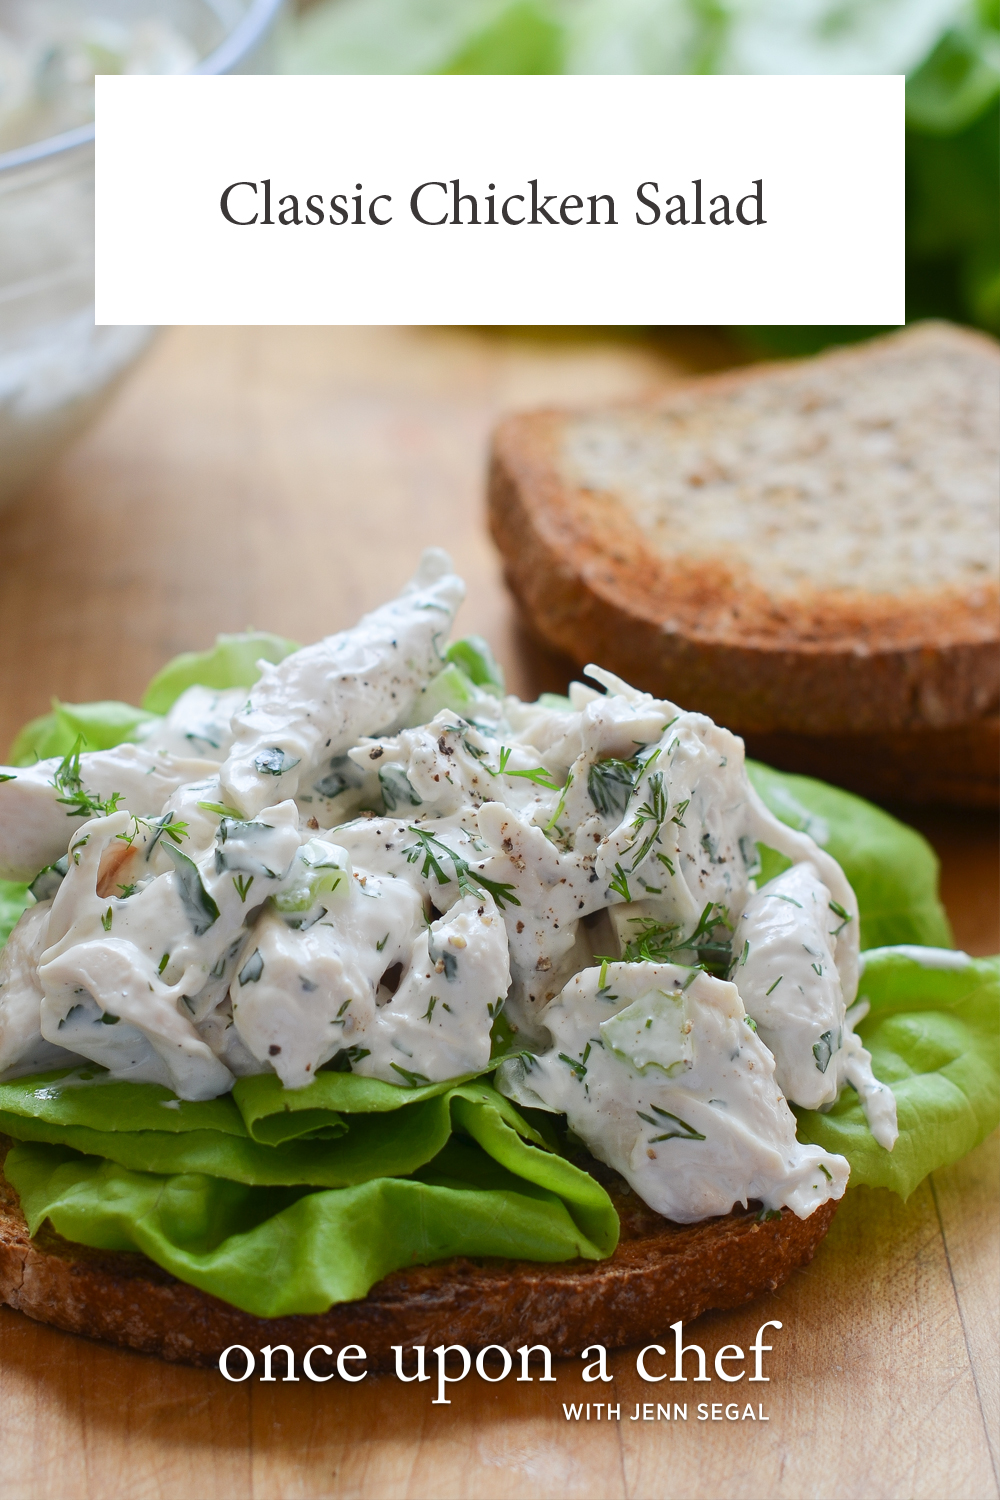 Classic Chicken Salad - Once Upon a Chef (A Great Basic Recipe)